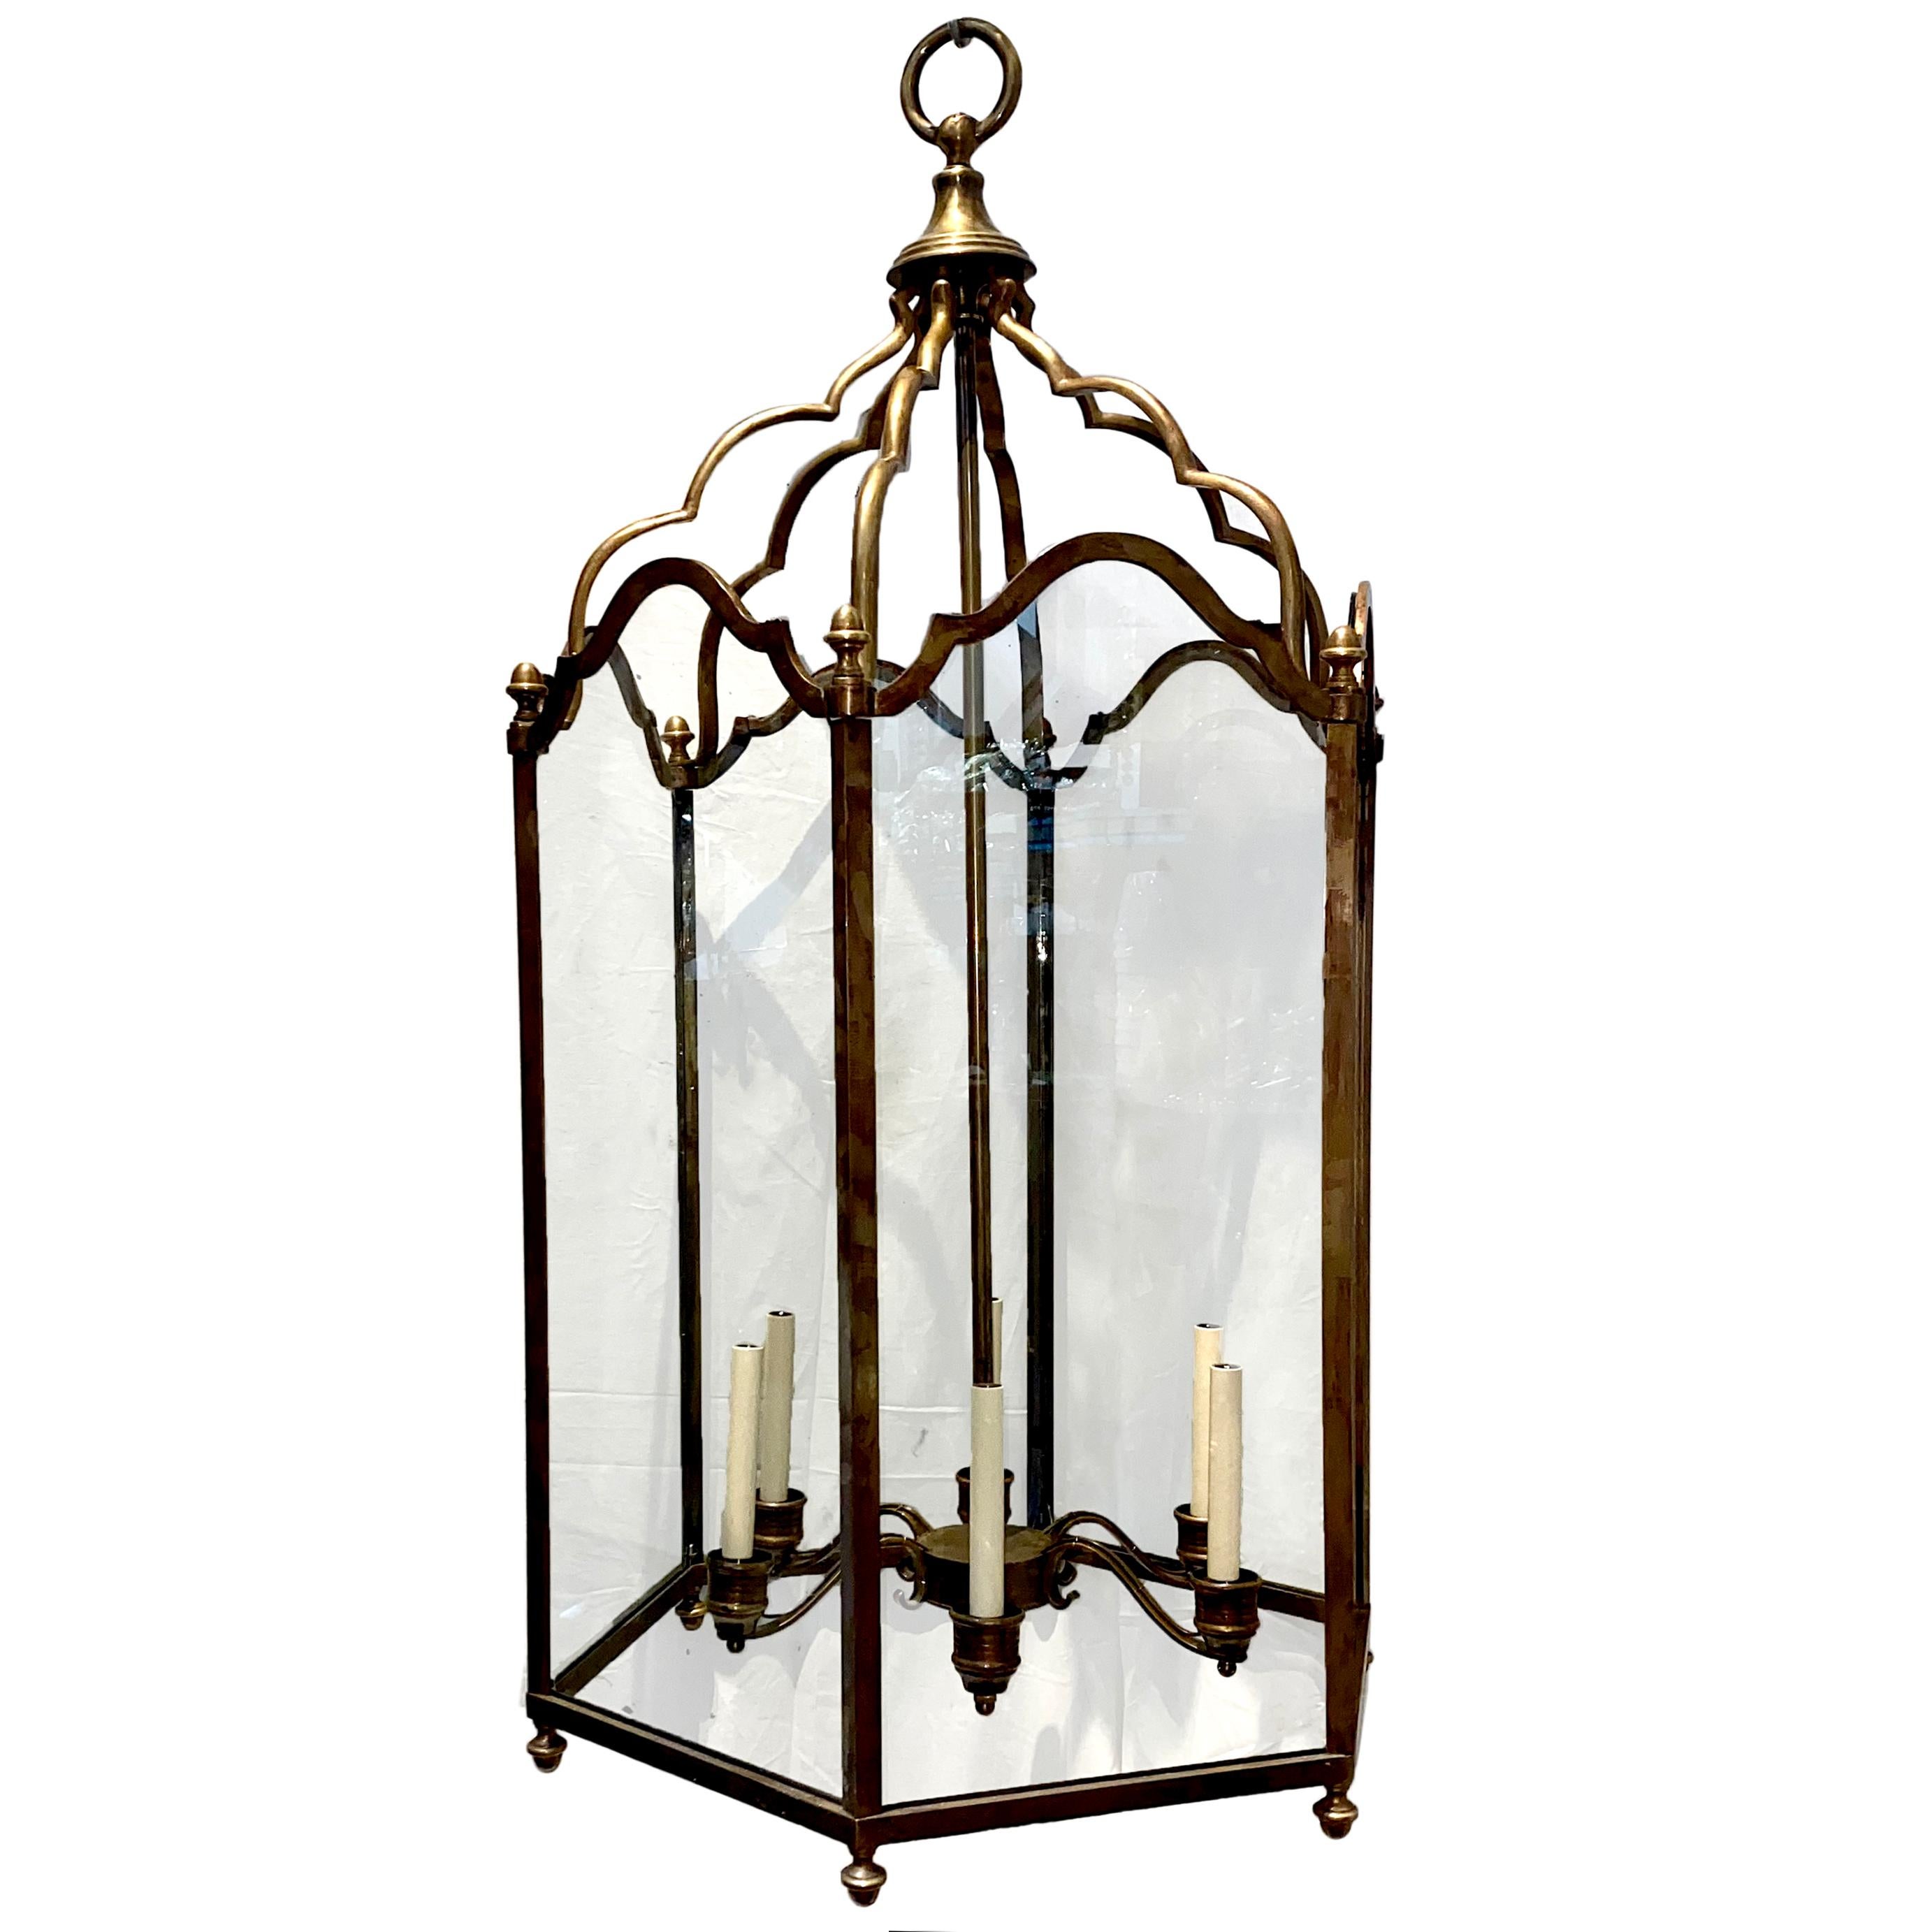 A circa 1940s English neoclassic style patinated bronze lantern with glass panels and six interior candelabra lights.

Measurements:
Present drop 51